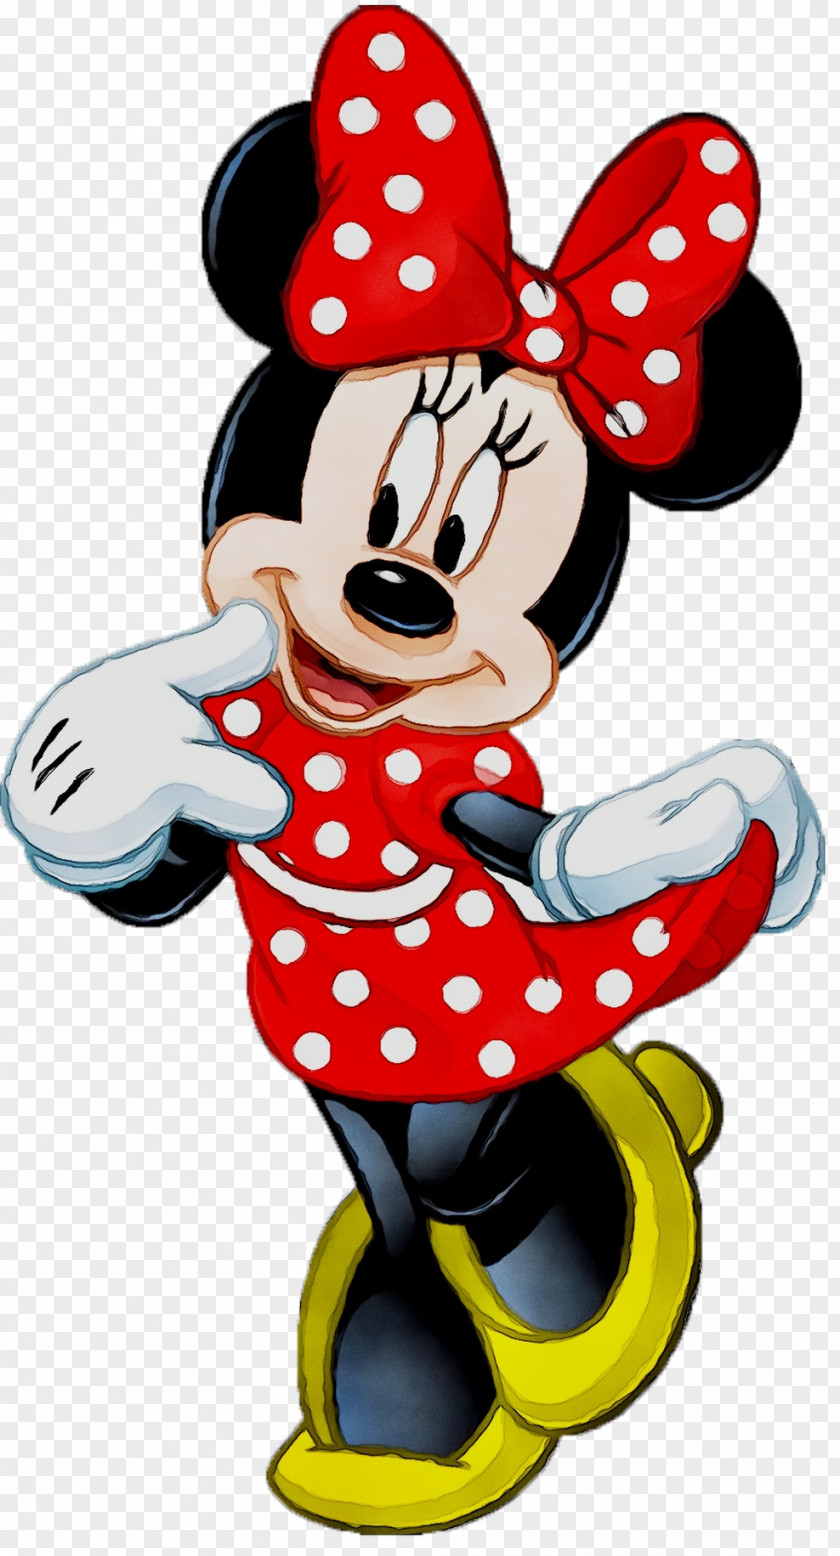 Minnie Mouse Mickey Desktop Wallpaper Image PNG